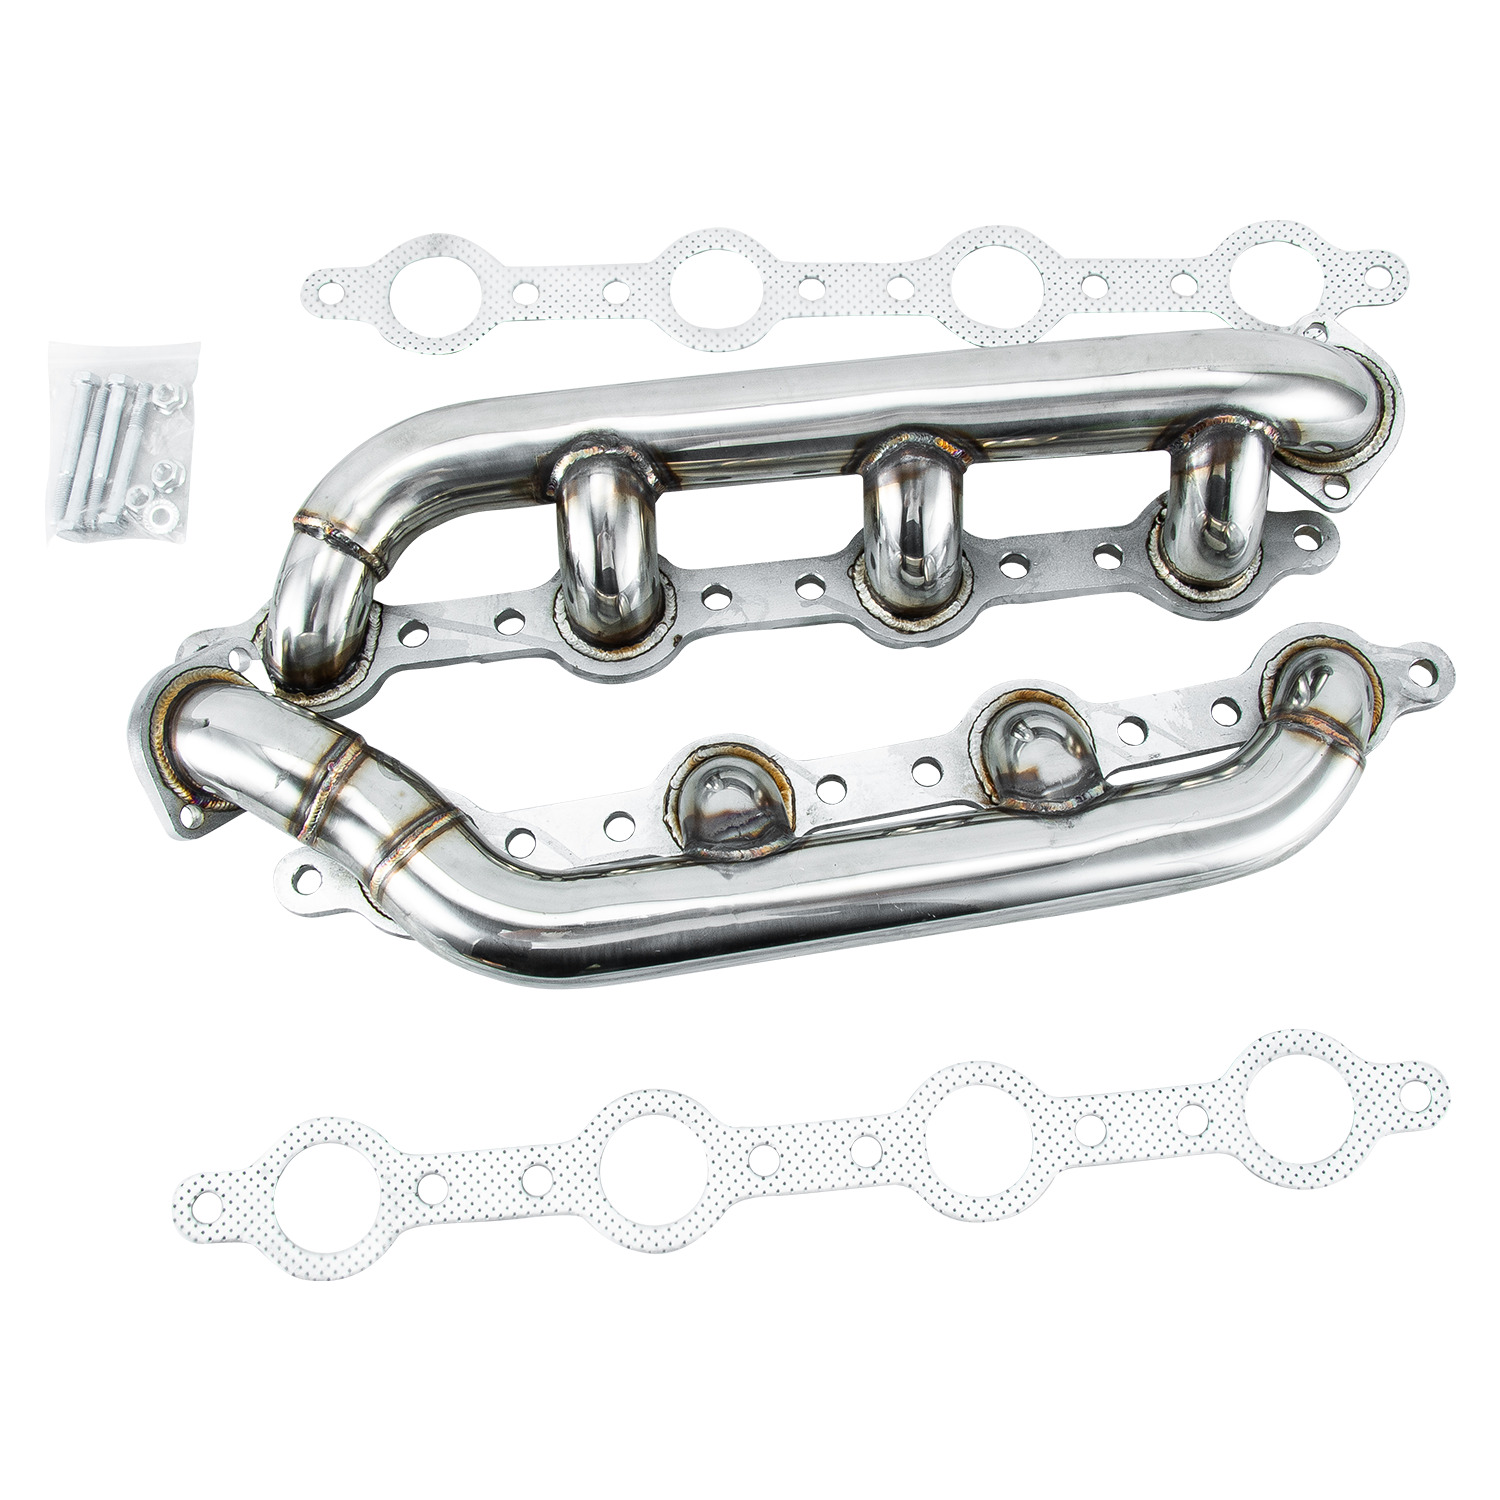 S/S Headers Manifold For 1999-2003 Ford Powerstroke F250 F350 F450 7.3L Diesel